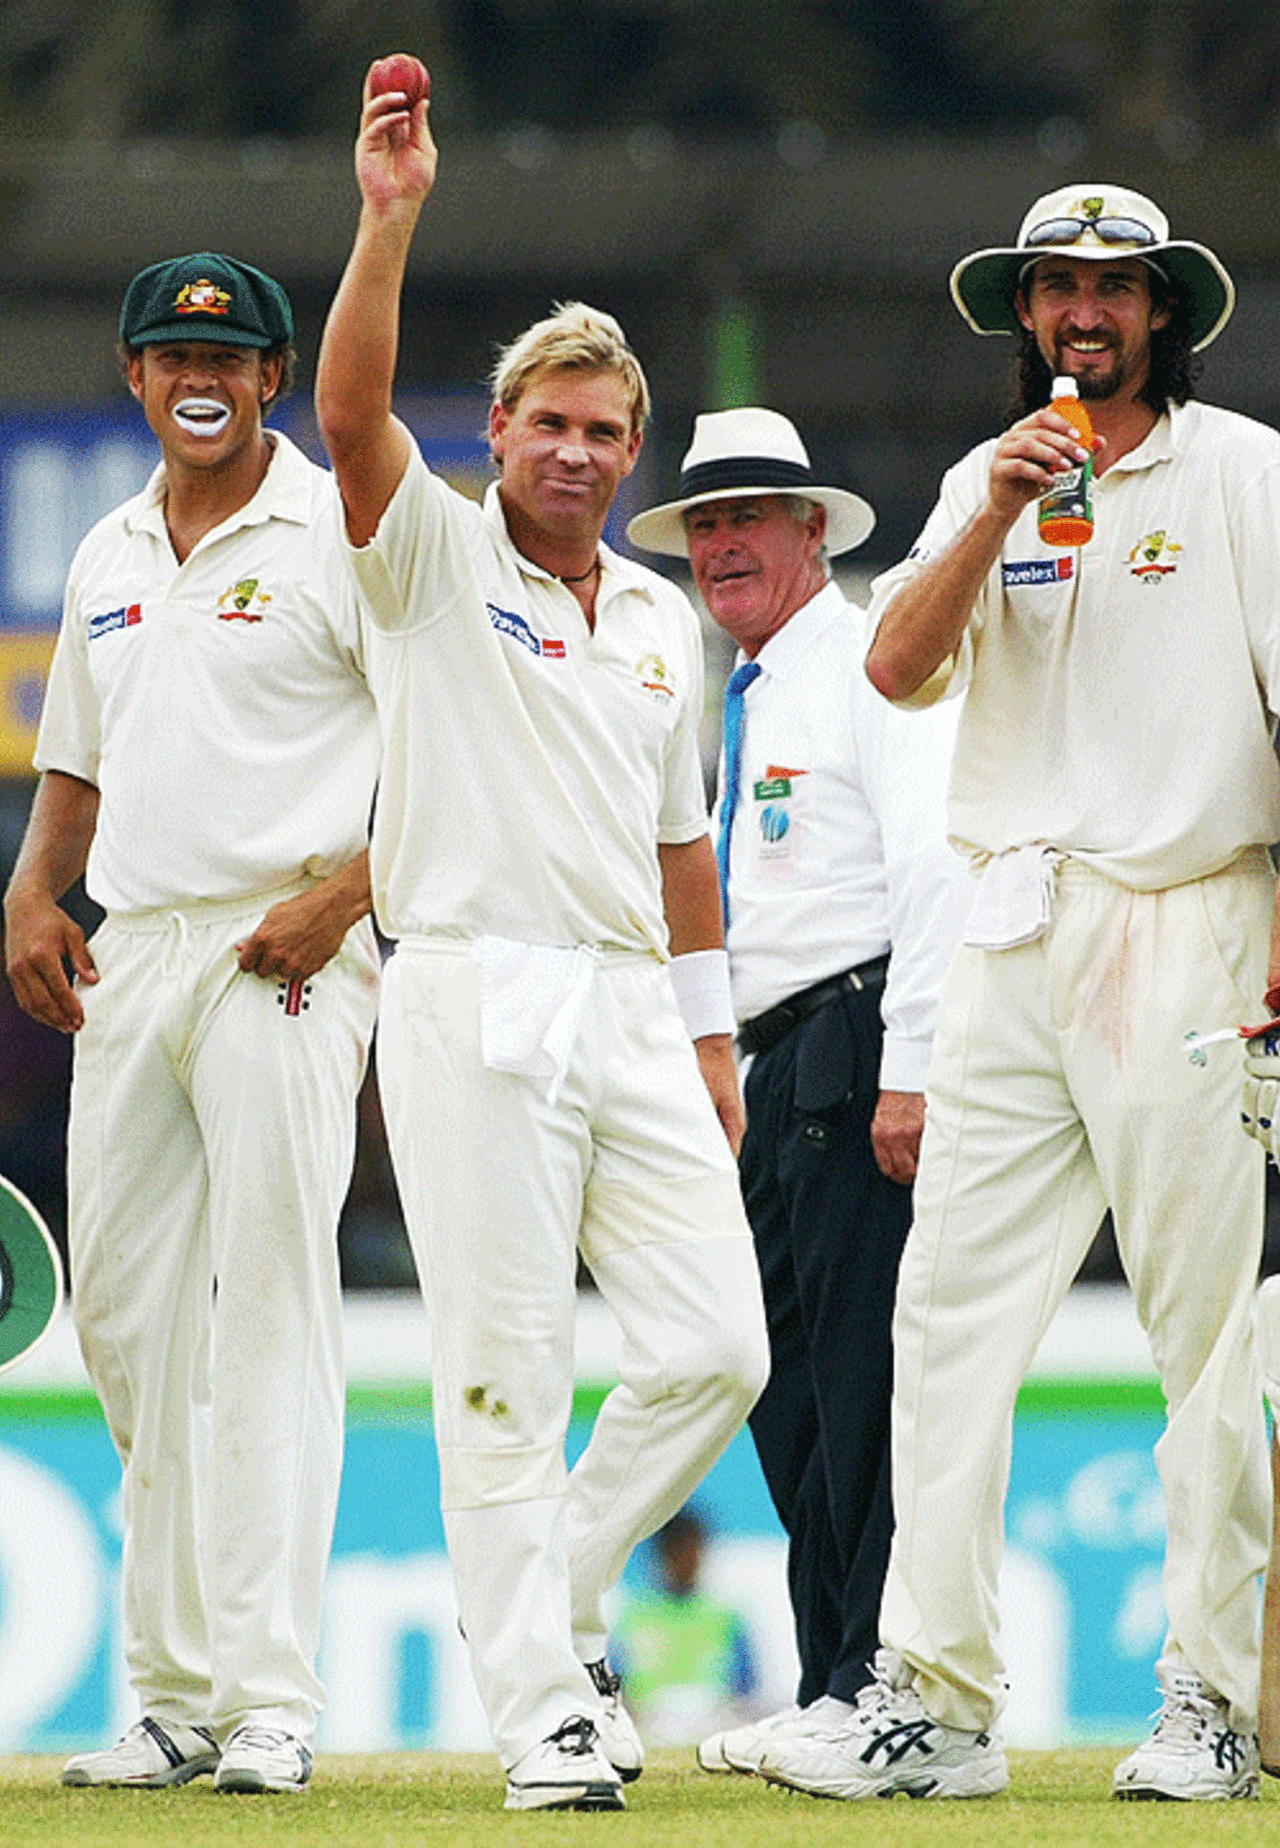 Shane Warne of Australia celebrates his 500th career wicket after dismissing Hashan Tillakaratne of Sri Lanka during day five of the First Test between Australia and Sri Lanka played at the Galle International Cricket Stadium on March 12, 2004 in Galle, Sri Lanka.